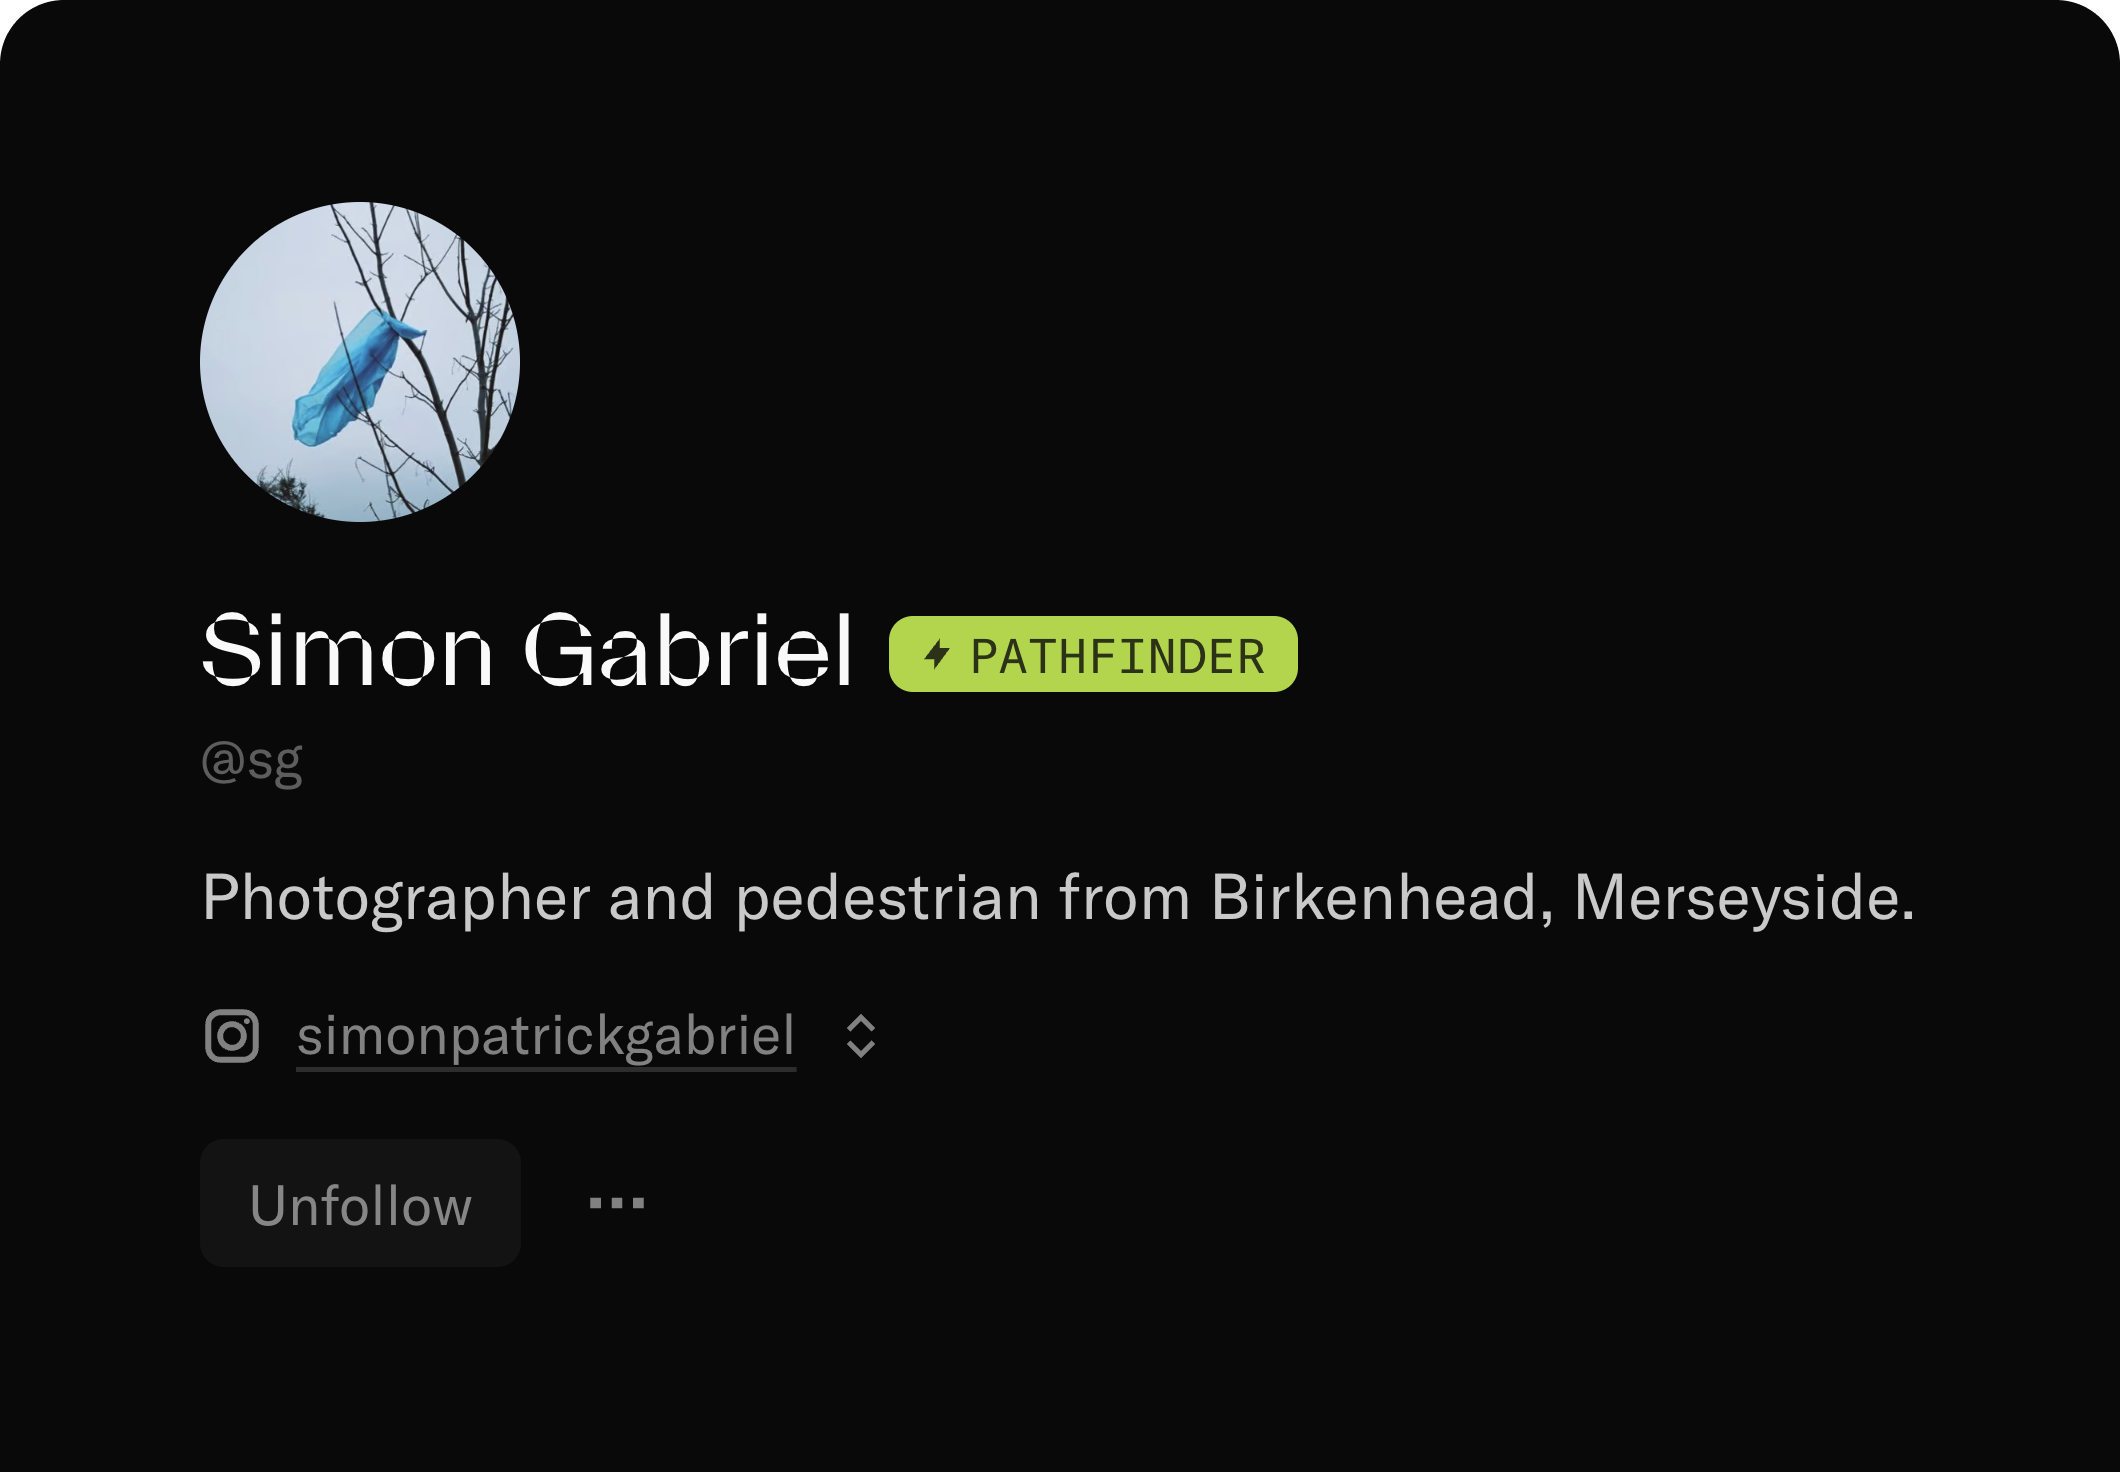 A screenshot of Simon Gabriel's (@sg) profile, showing off the new Pathfinder badge next to their name.